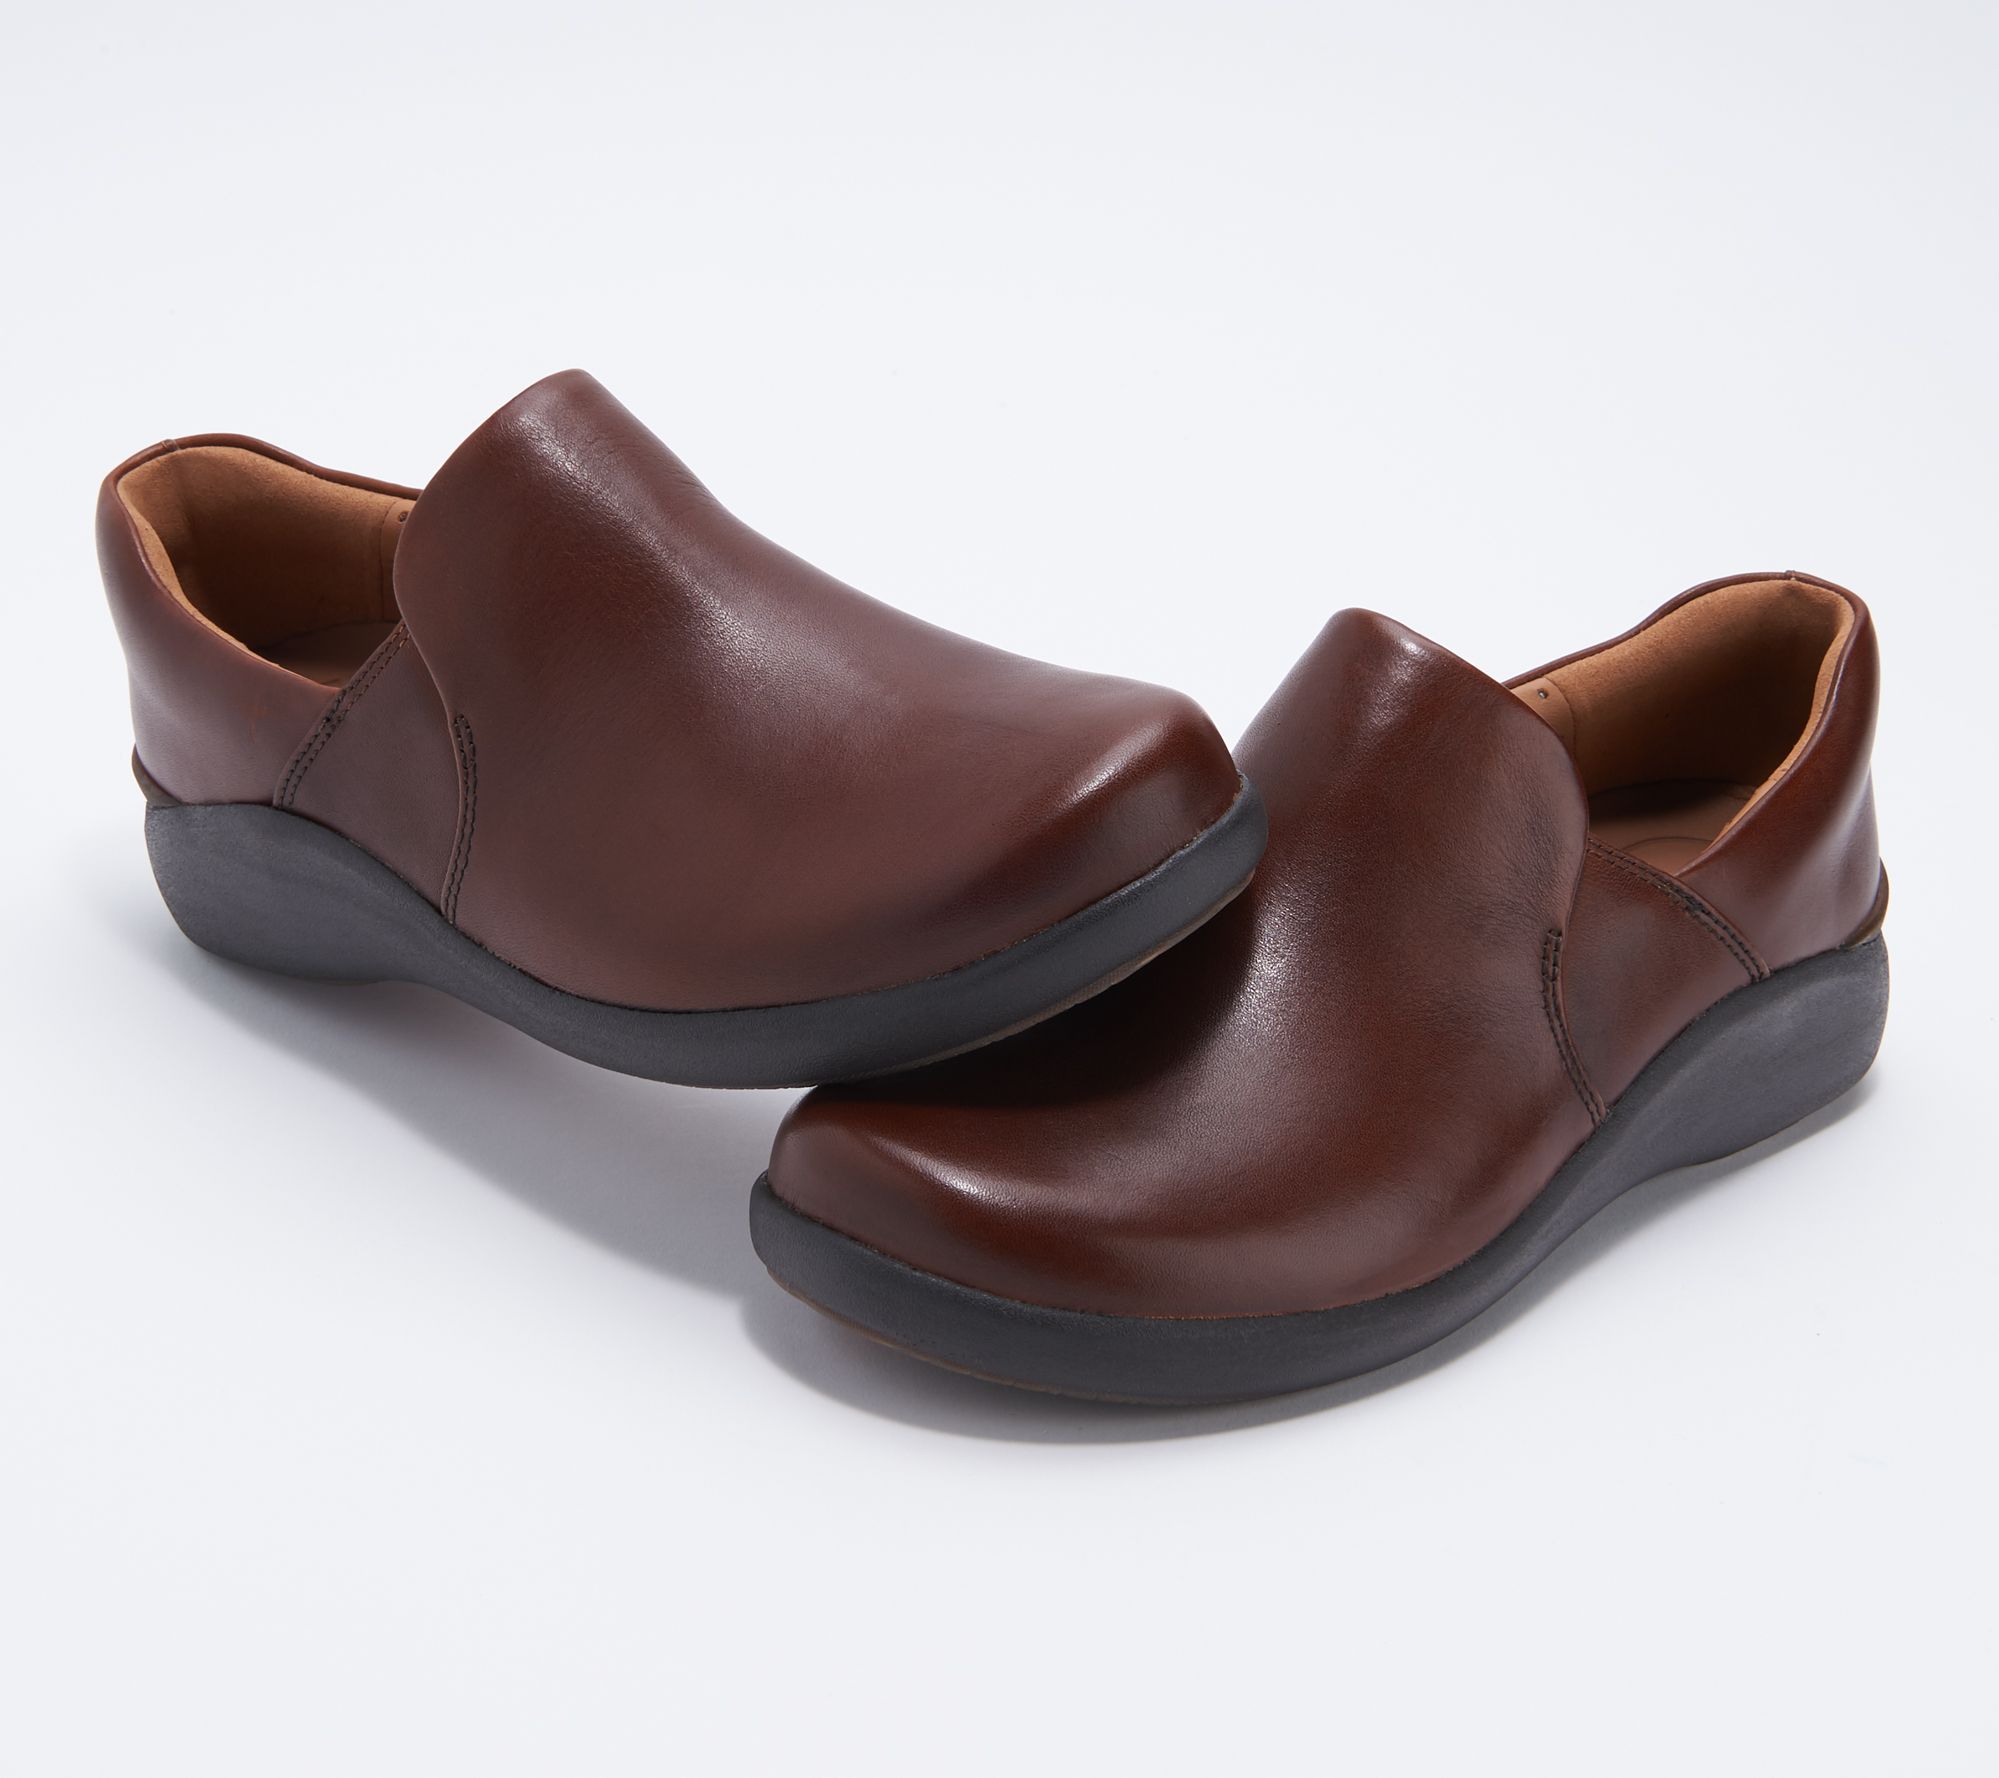 clarks slip on leather shoes